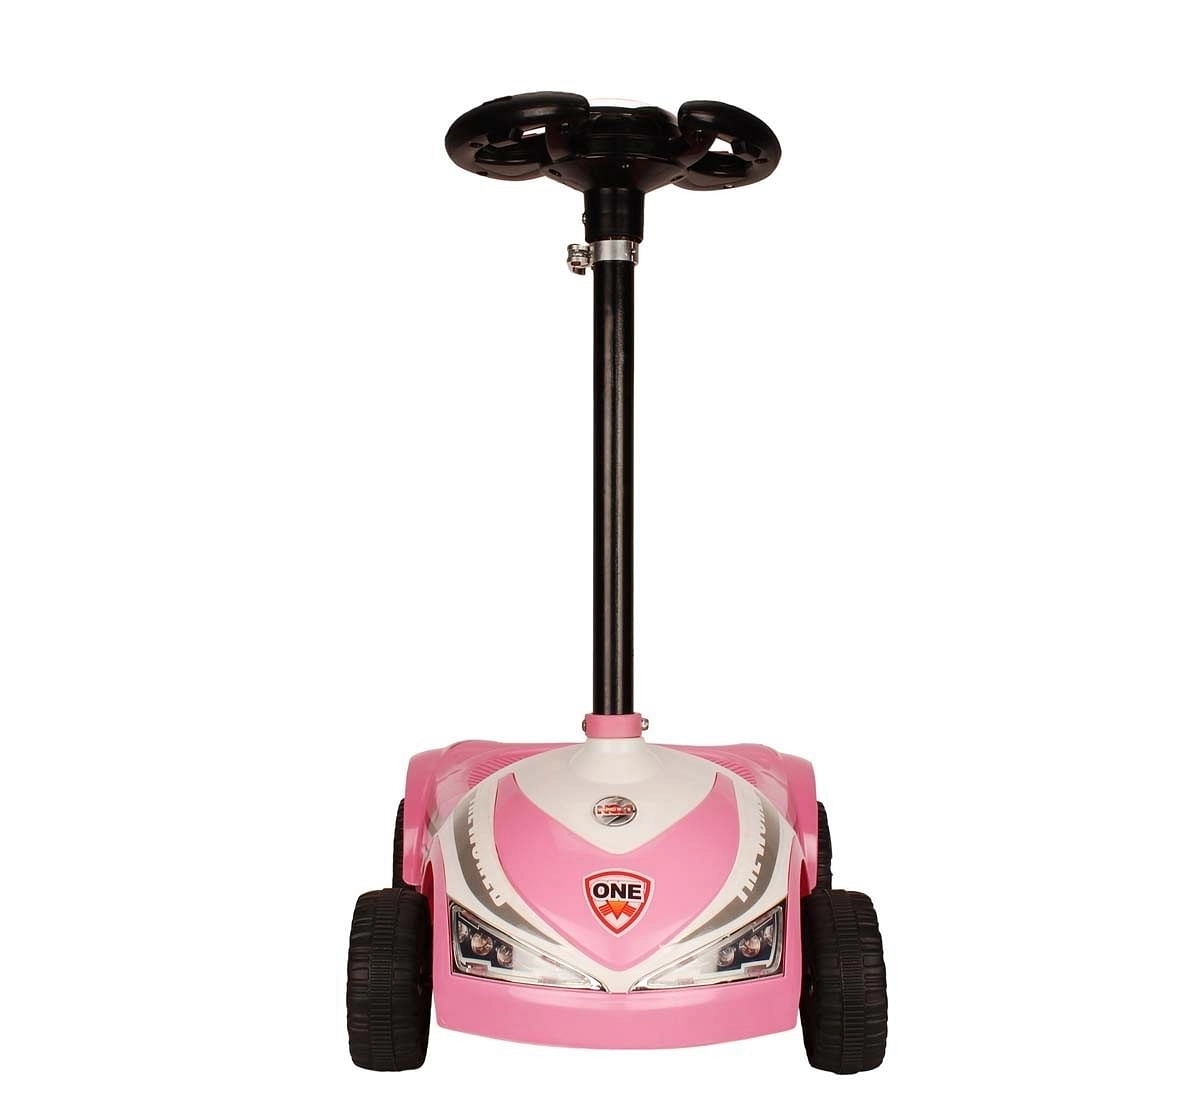 Megawheel Kids Scooty Pink Novelty Rideons for Kids age 3Y+ 